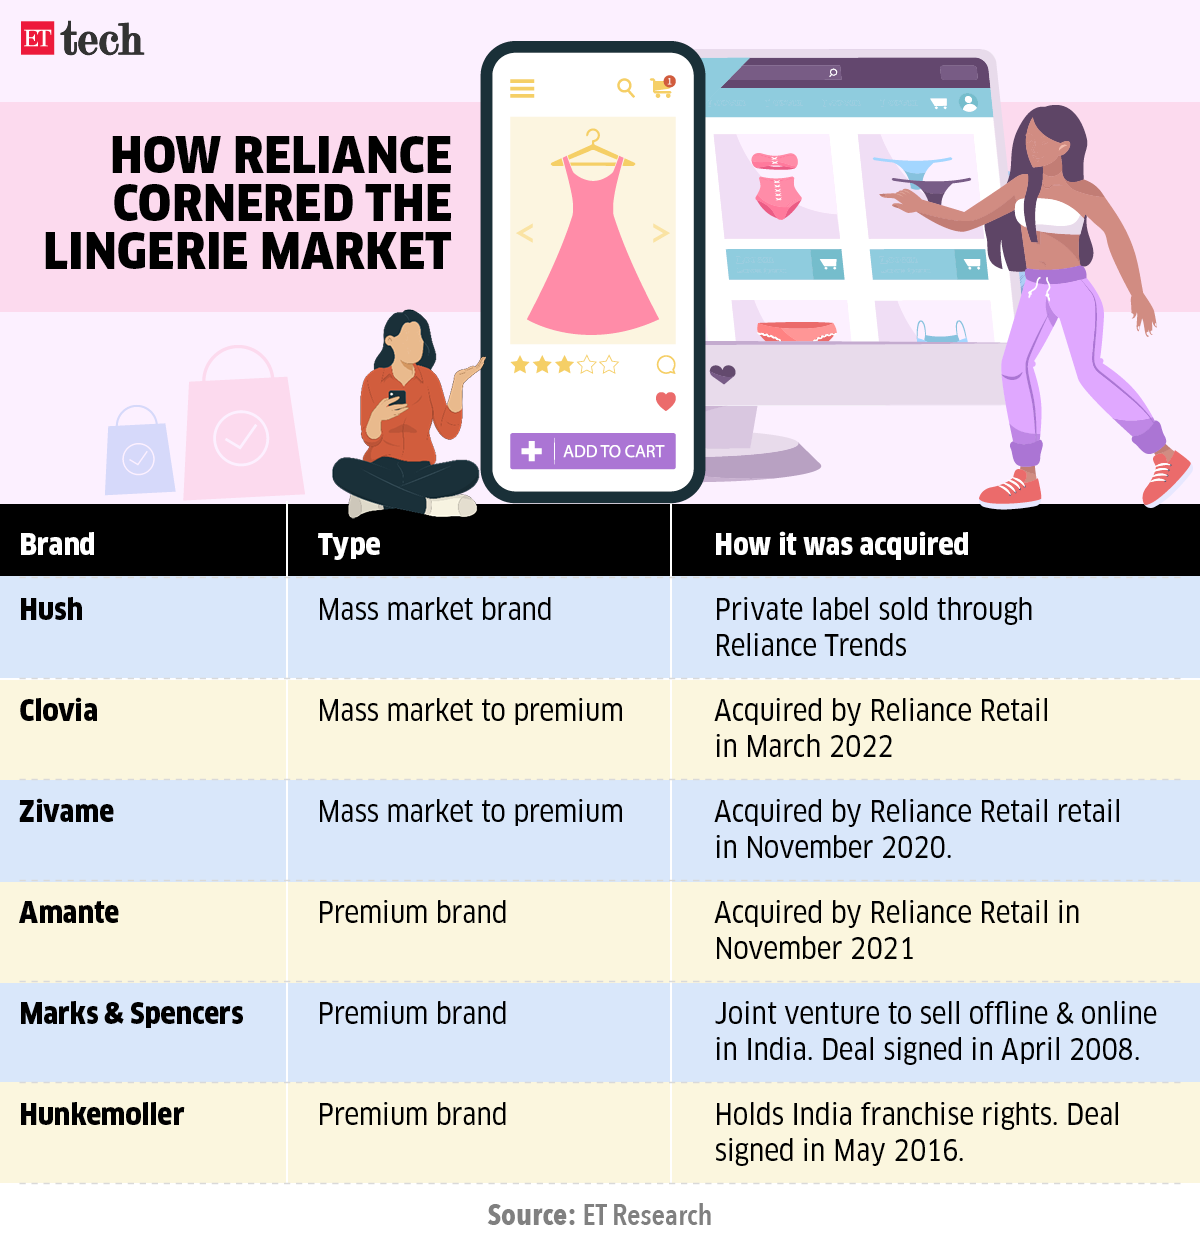 How Reliance cornered the lingerie market